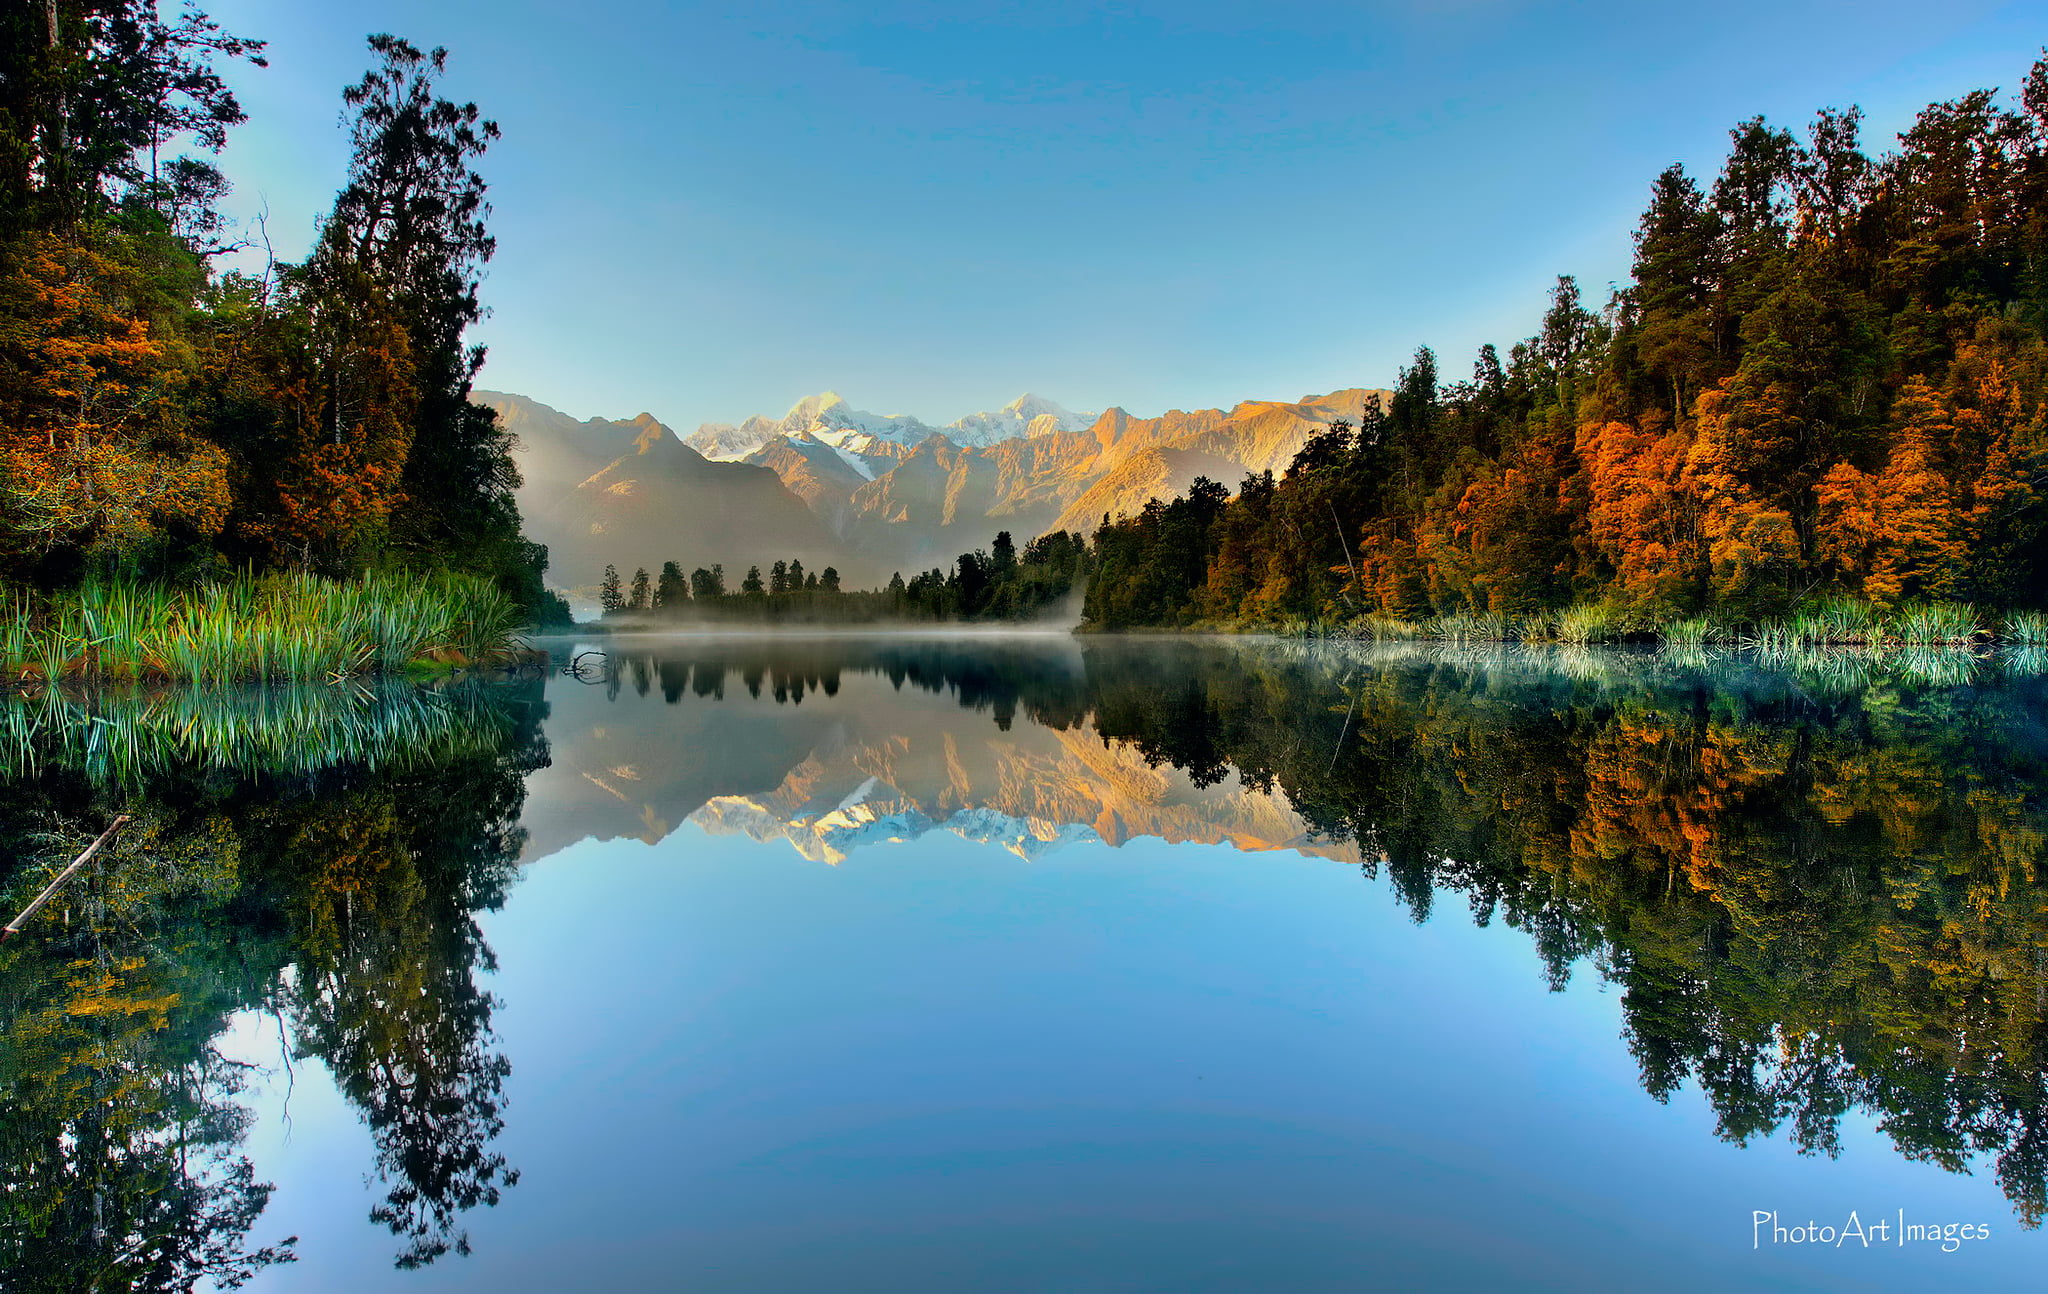 body of water, forest, reflection, mountains, lake, New Zealand